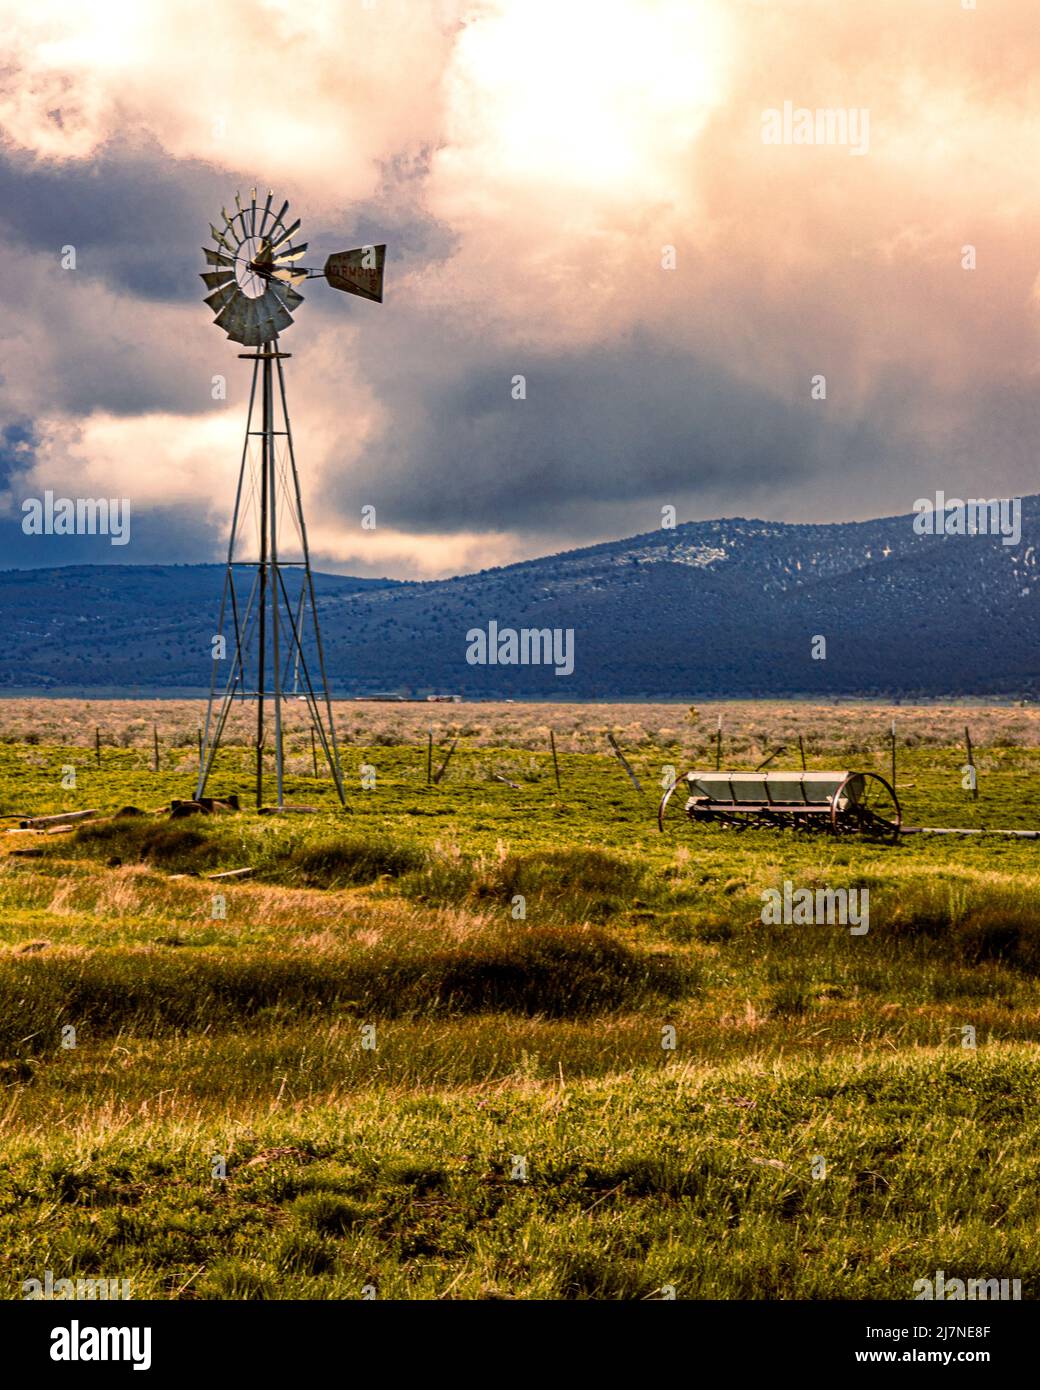 The image captures my favorite old Aermotor in Lassen County, California USA on a late spring afternoon during some very unsettled weather conditions. Stock Photo